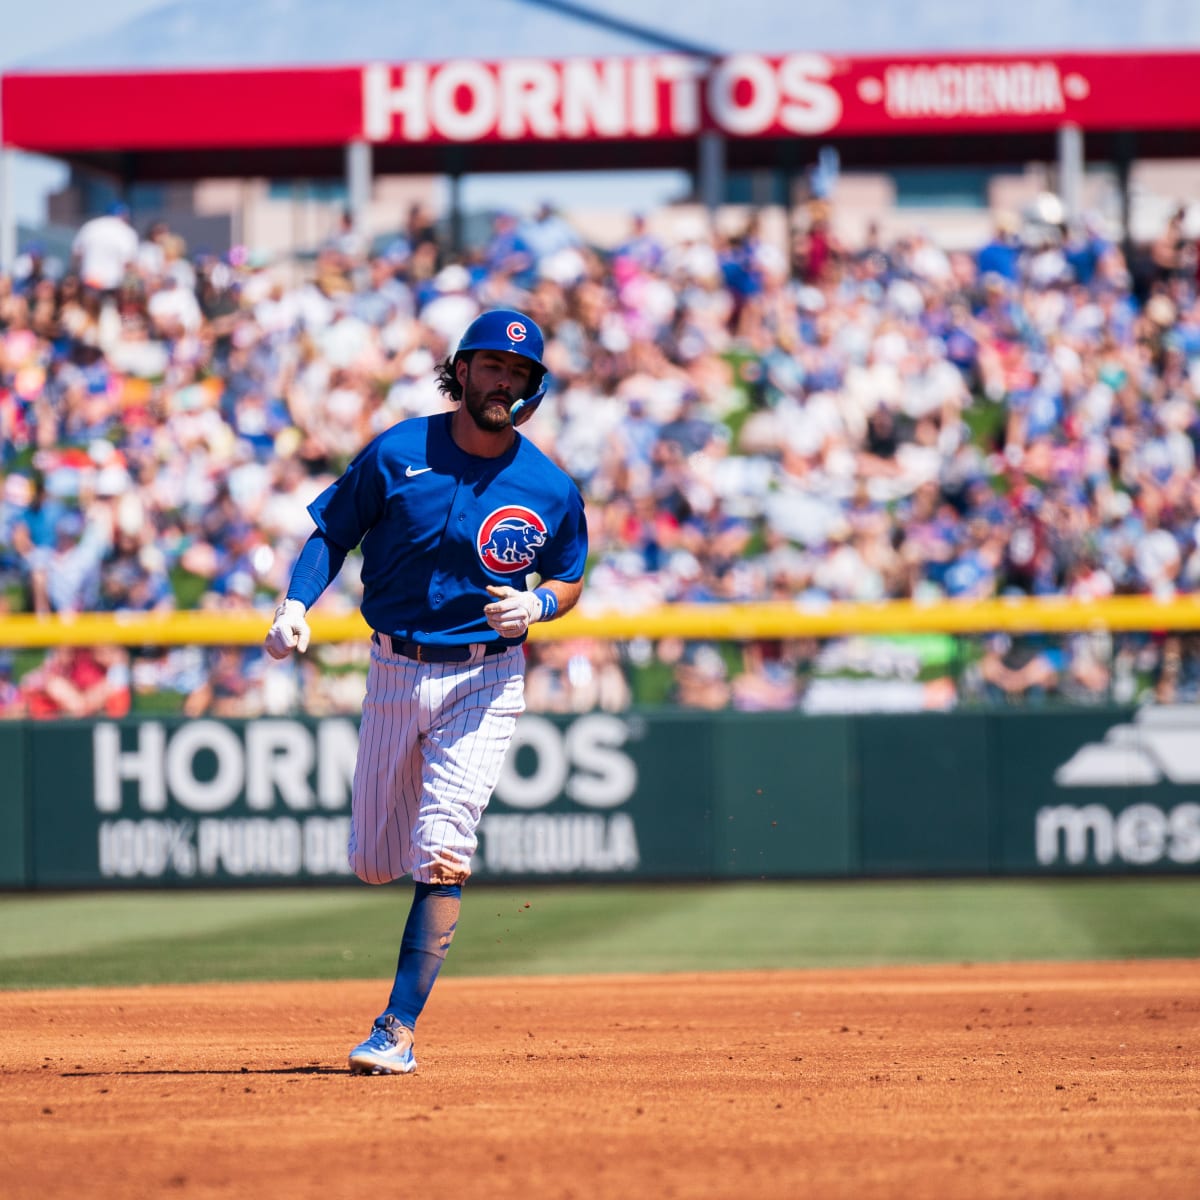 Dansby Swanson is excited for his first Spring Training as a Cub